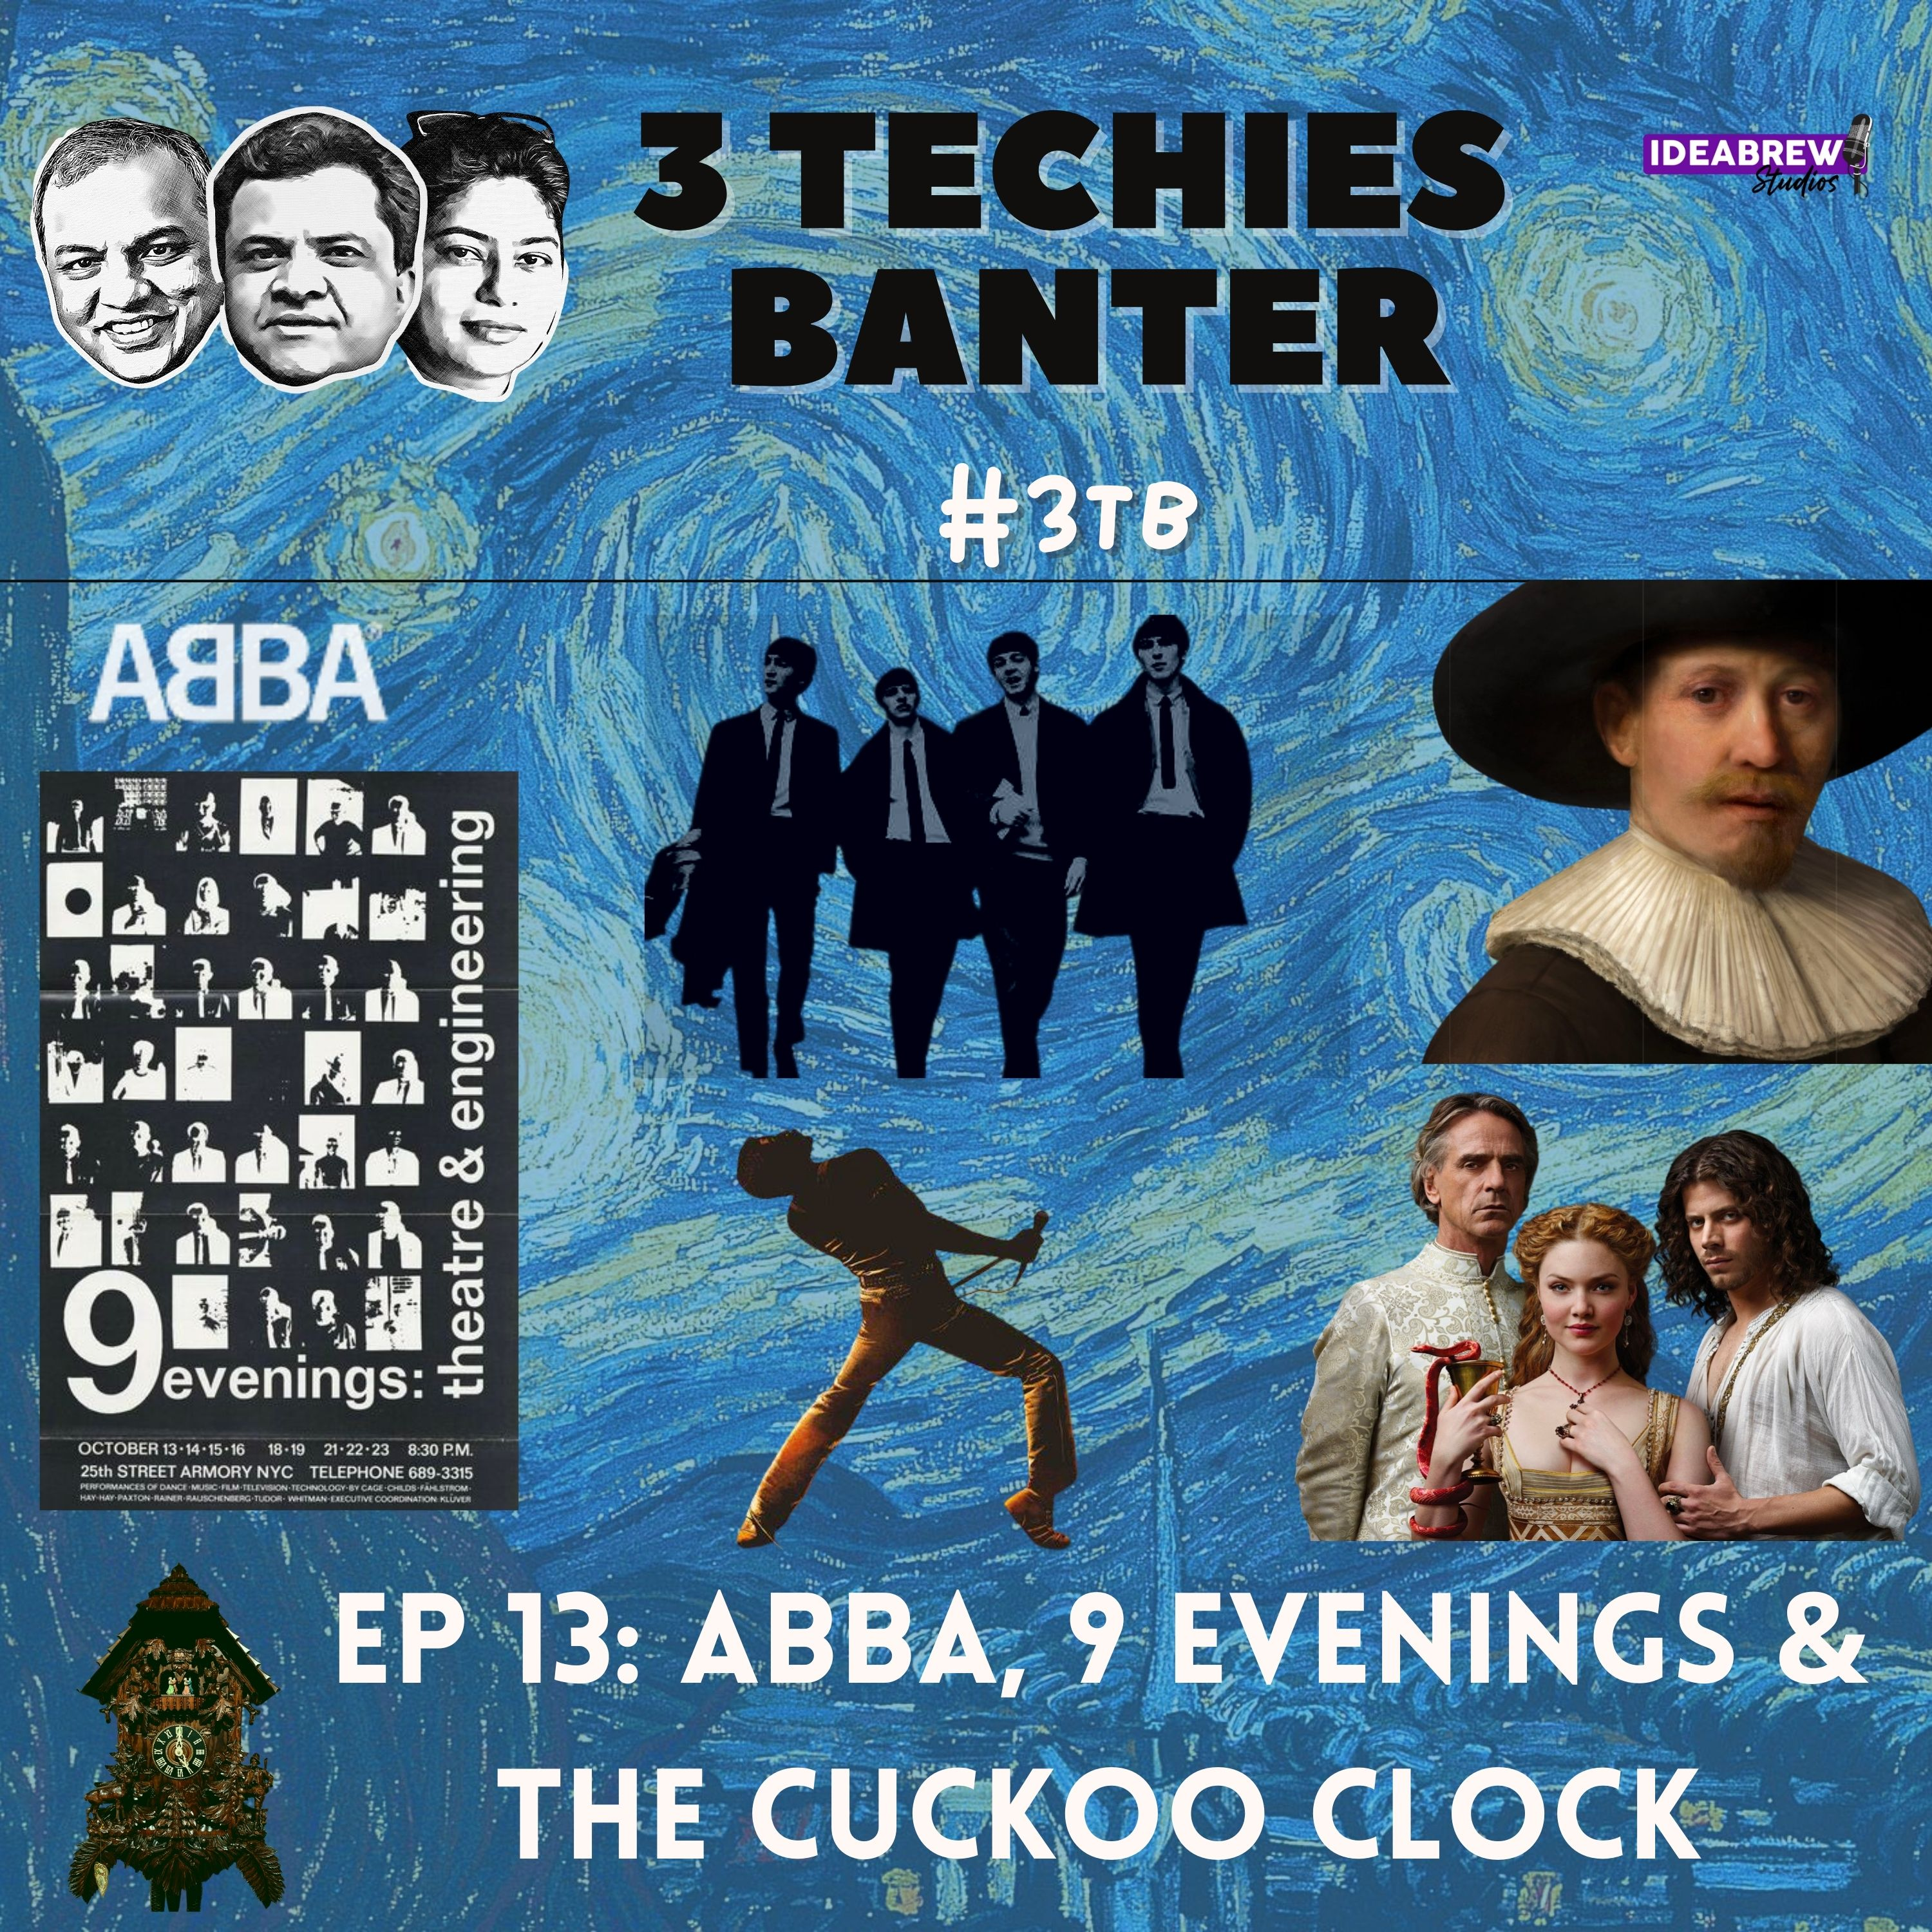 ABBA, 9 Evenings and the Cuckoo Clock